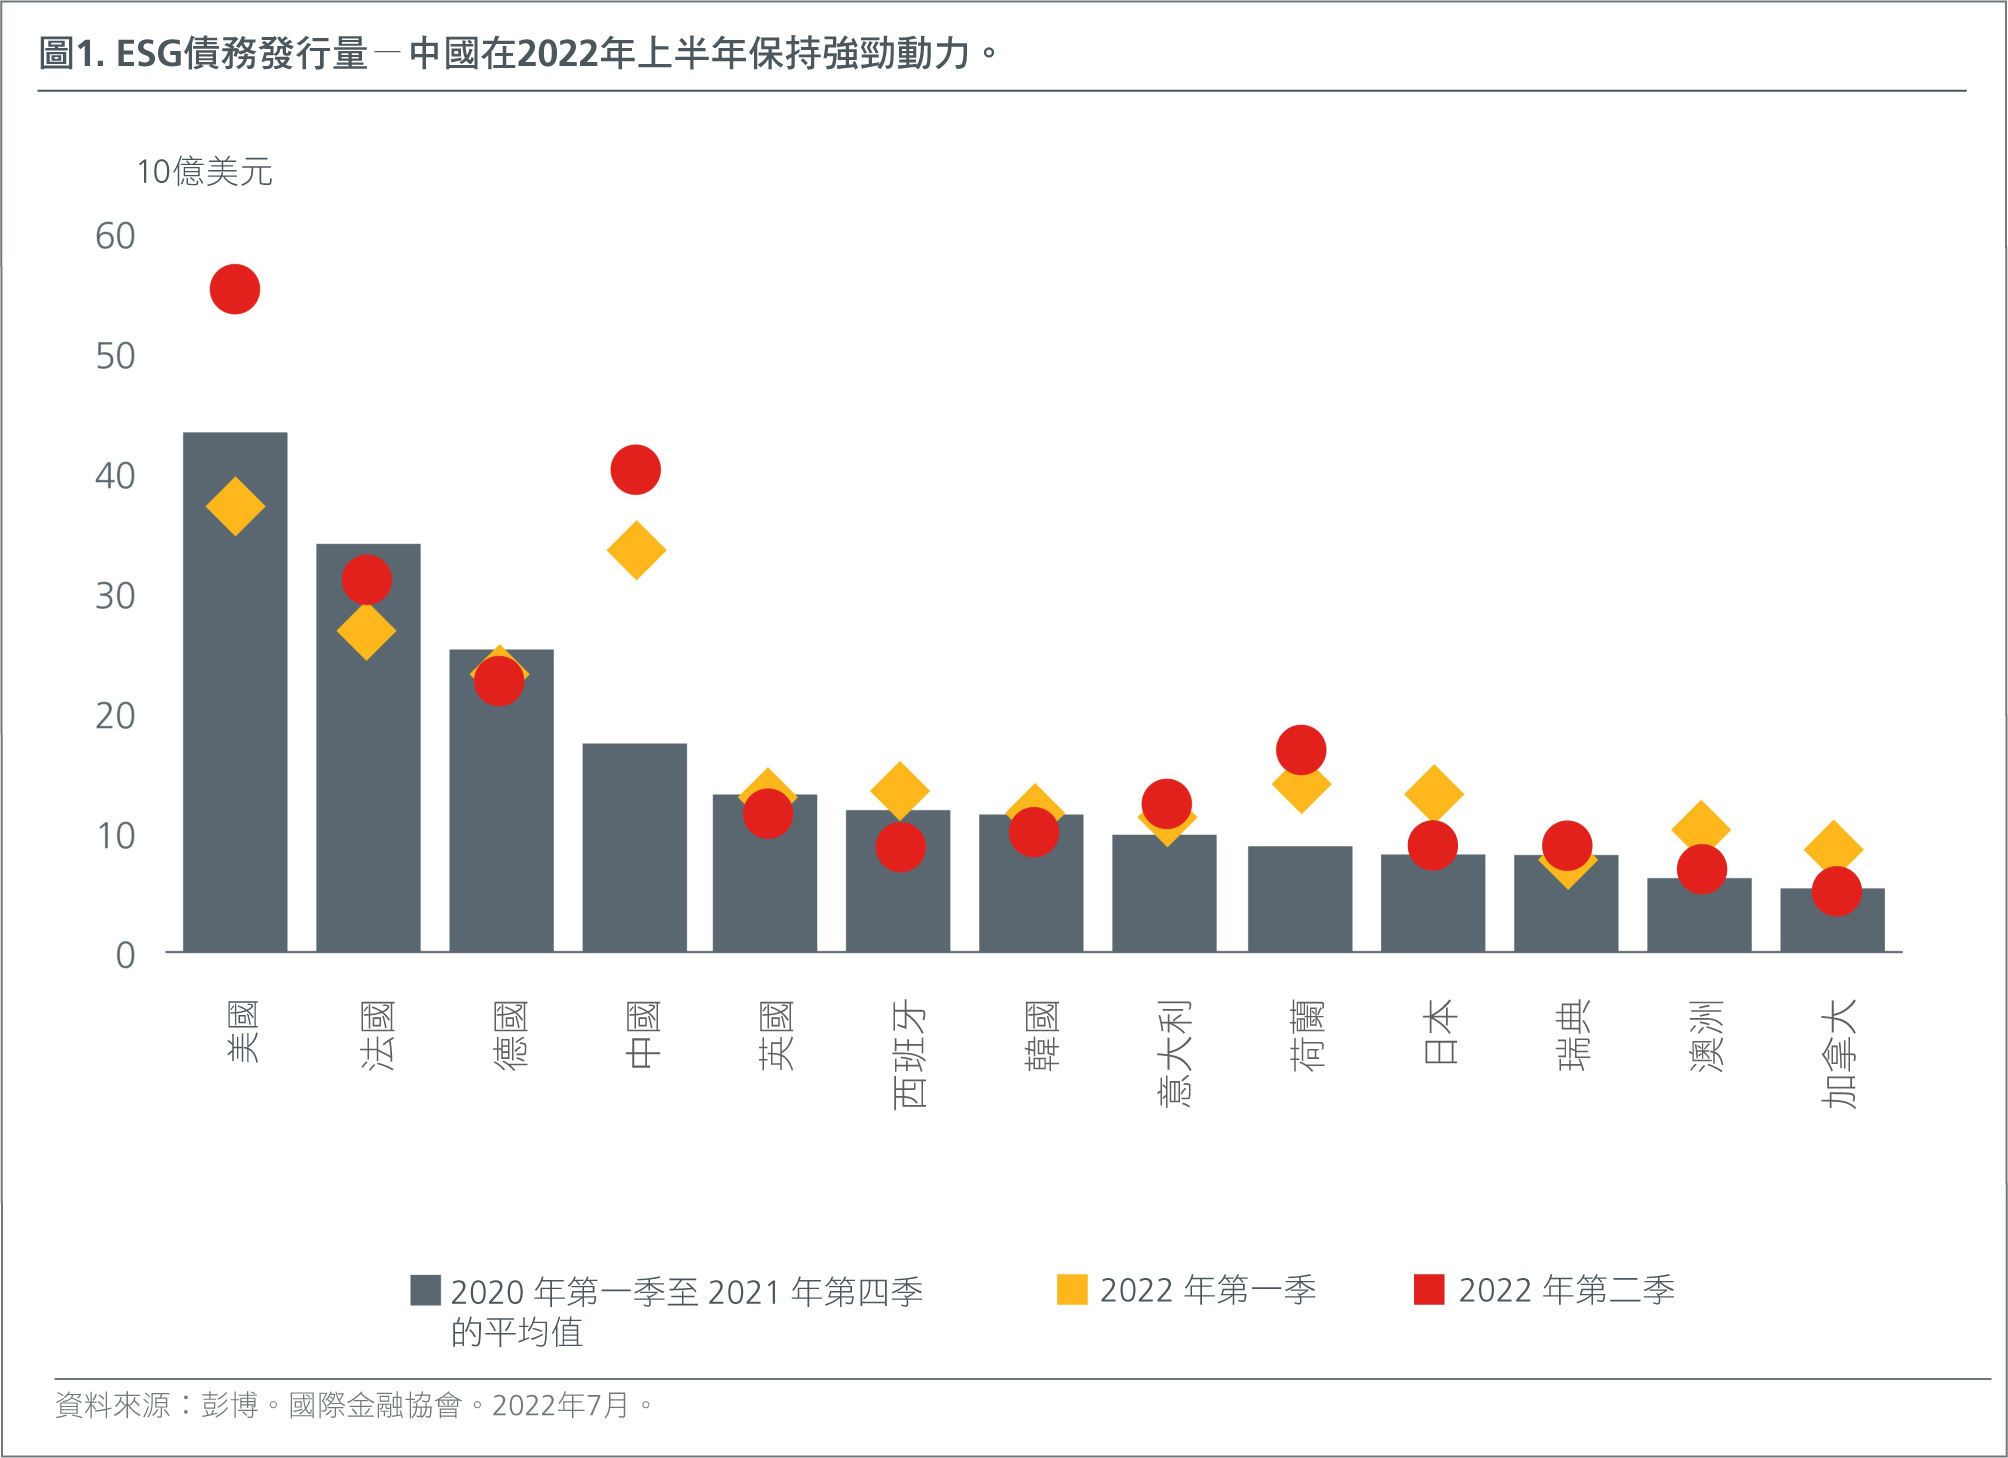 ESG debt issuance – China maintained strong momentum in 1H22